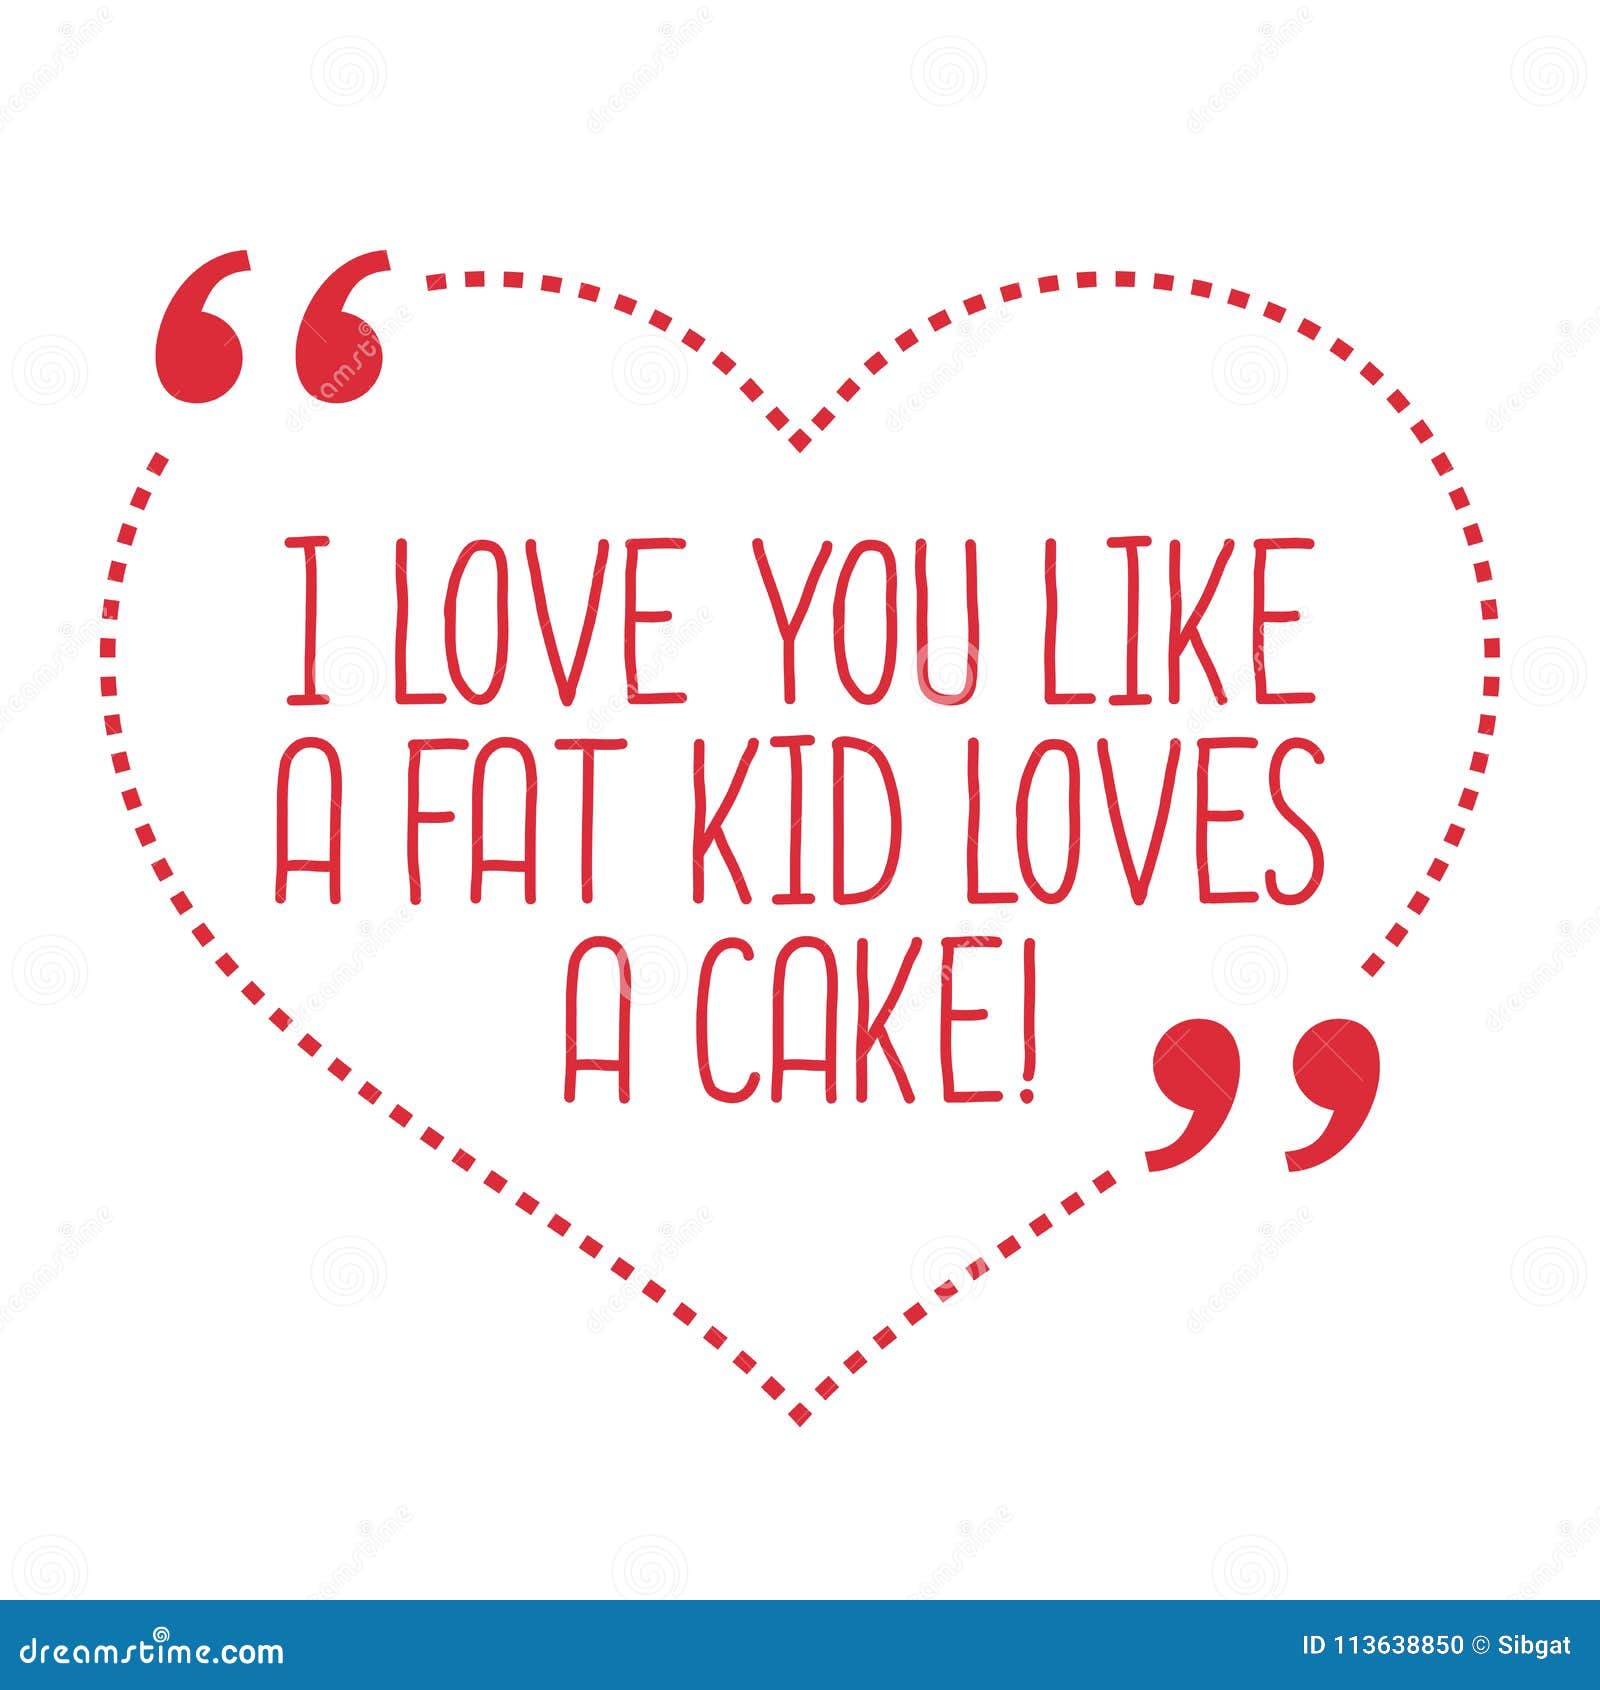 Funny Love Quote. I Love You Like A Fat Kid Loves A Cake. Stock Vector - Illustration of couple ...